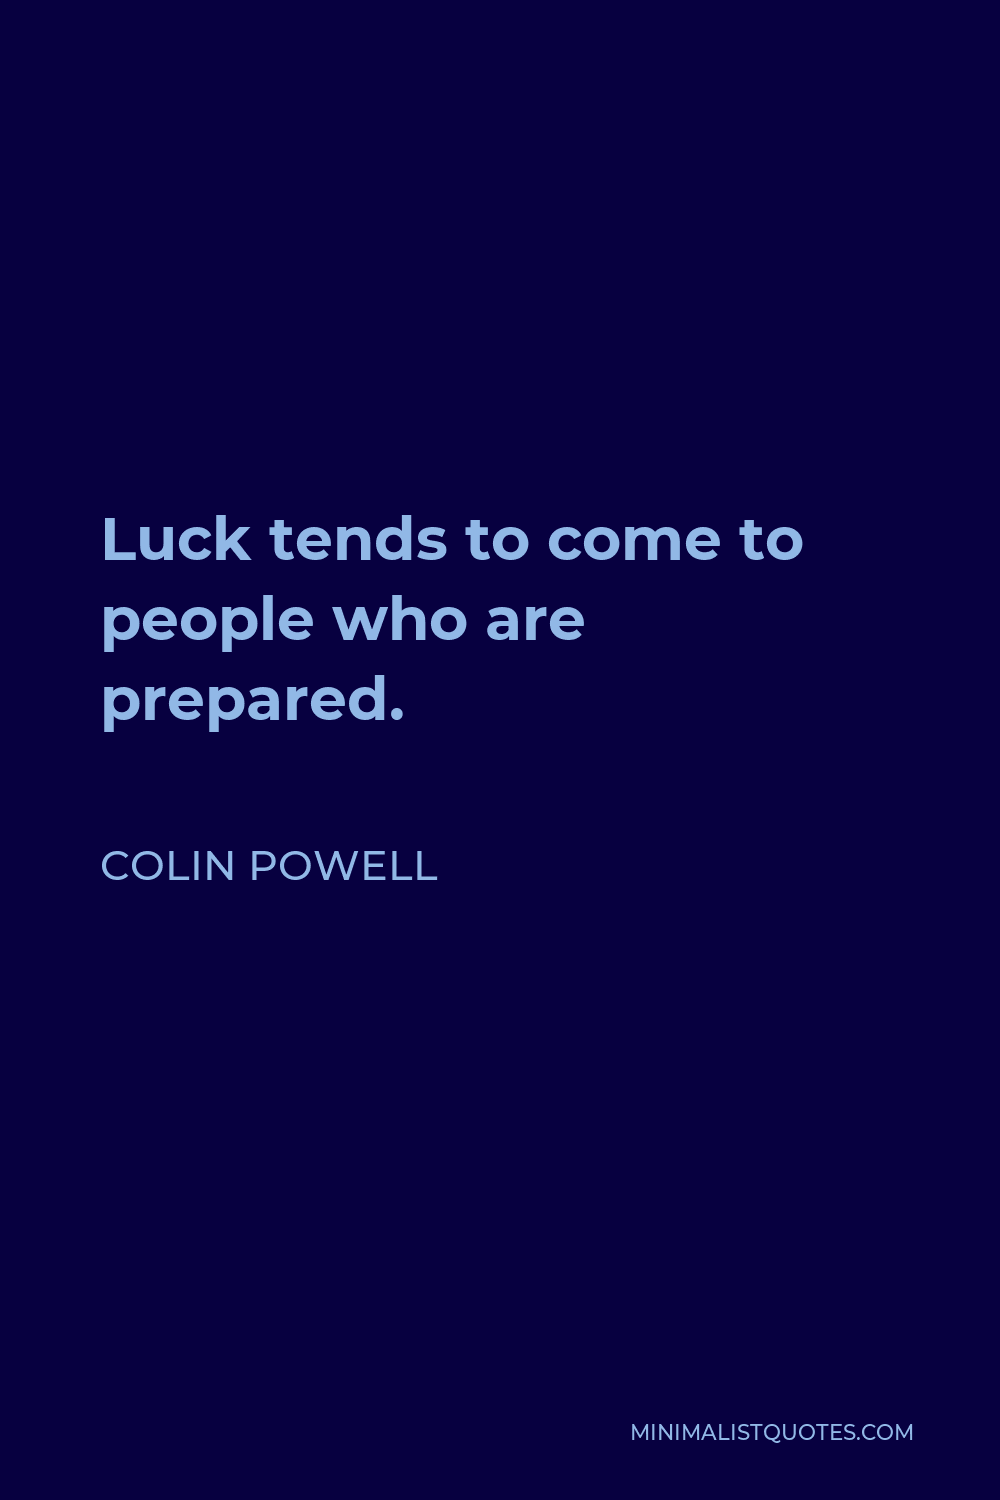 Colin Powell Quote - Luck tends to come to people who are prepared.